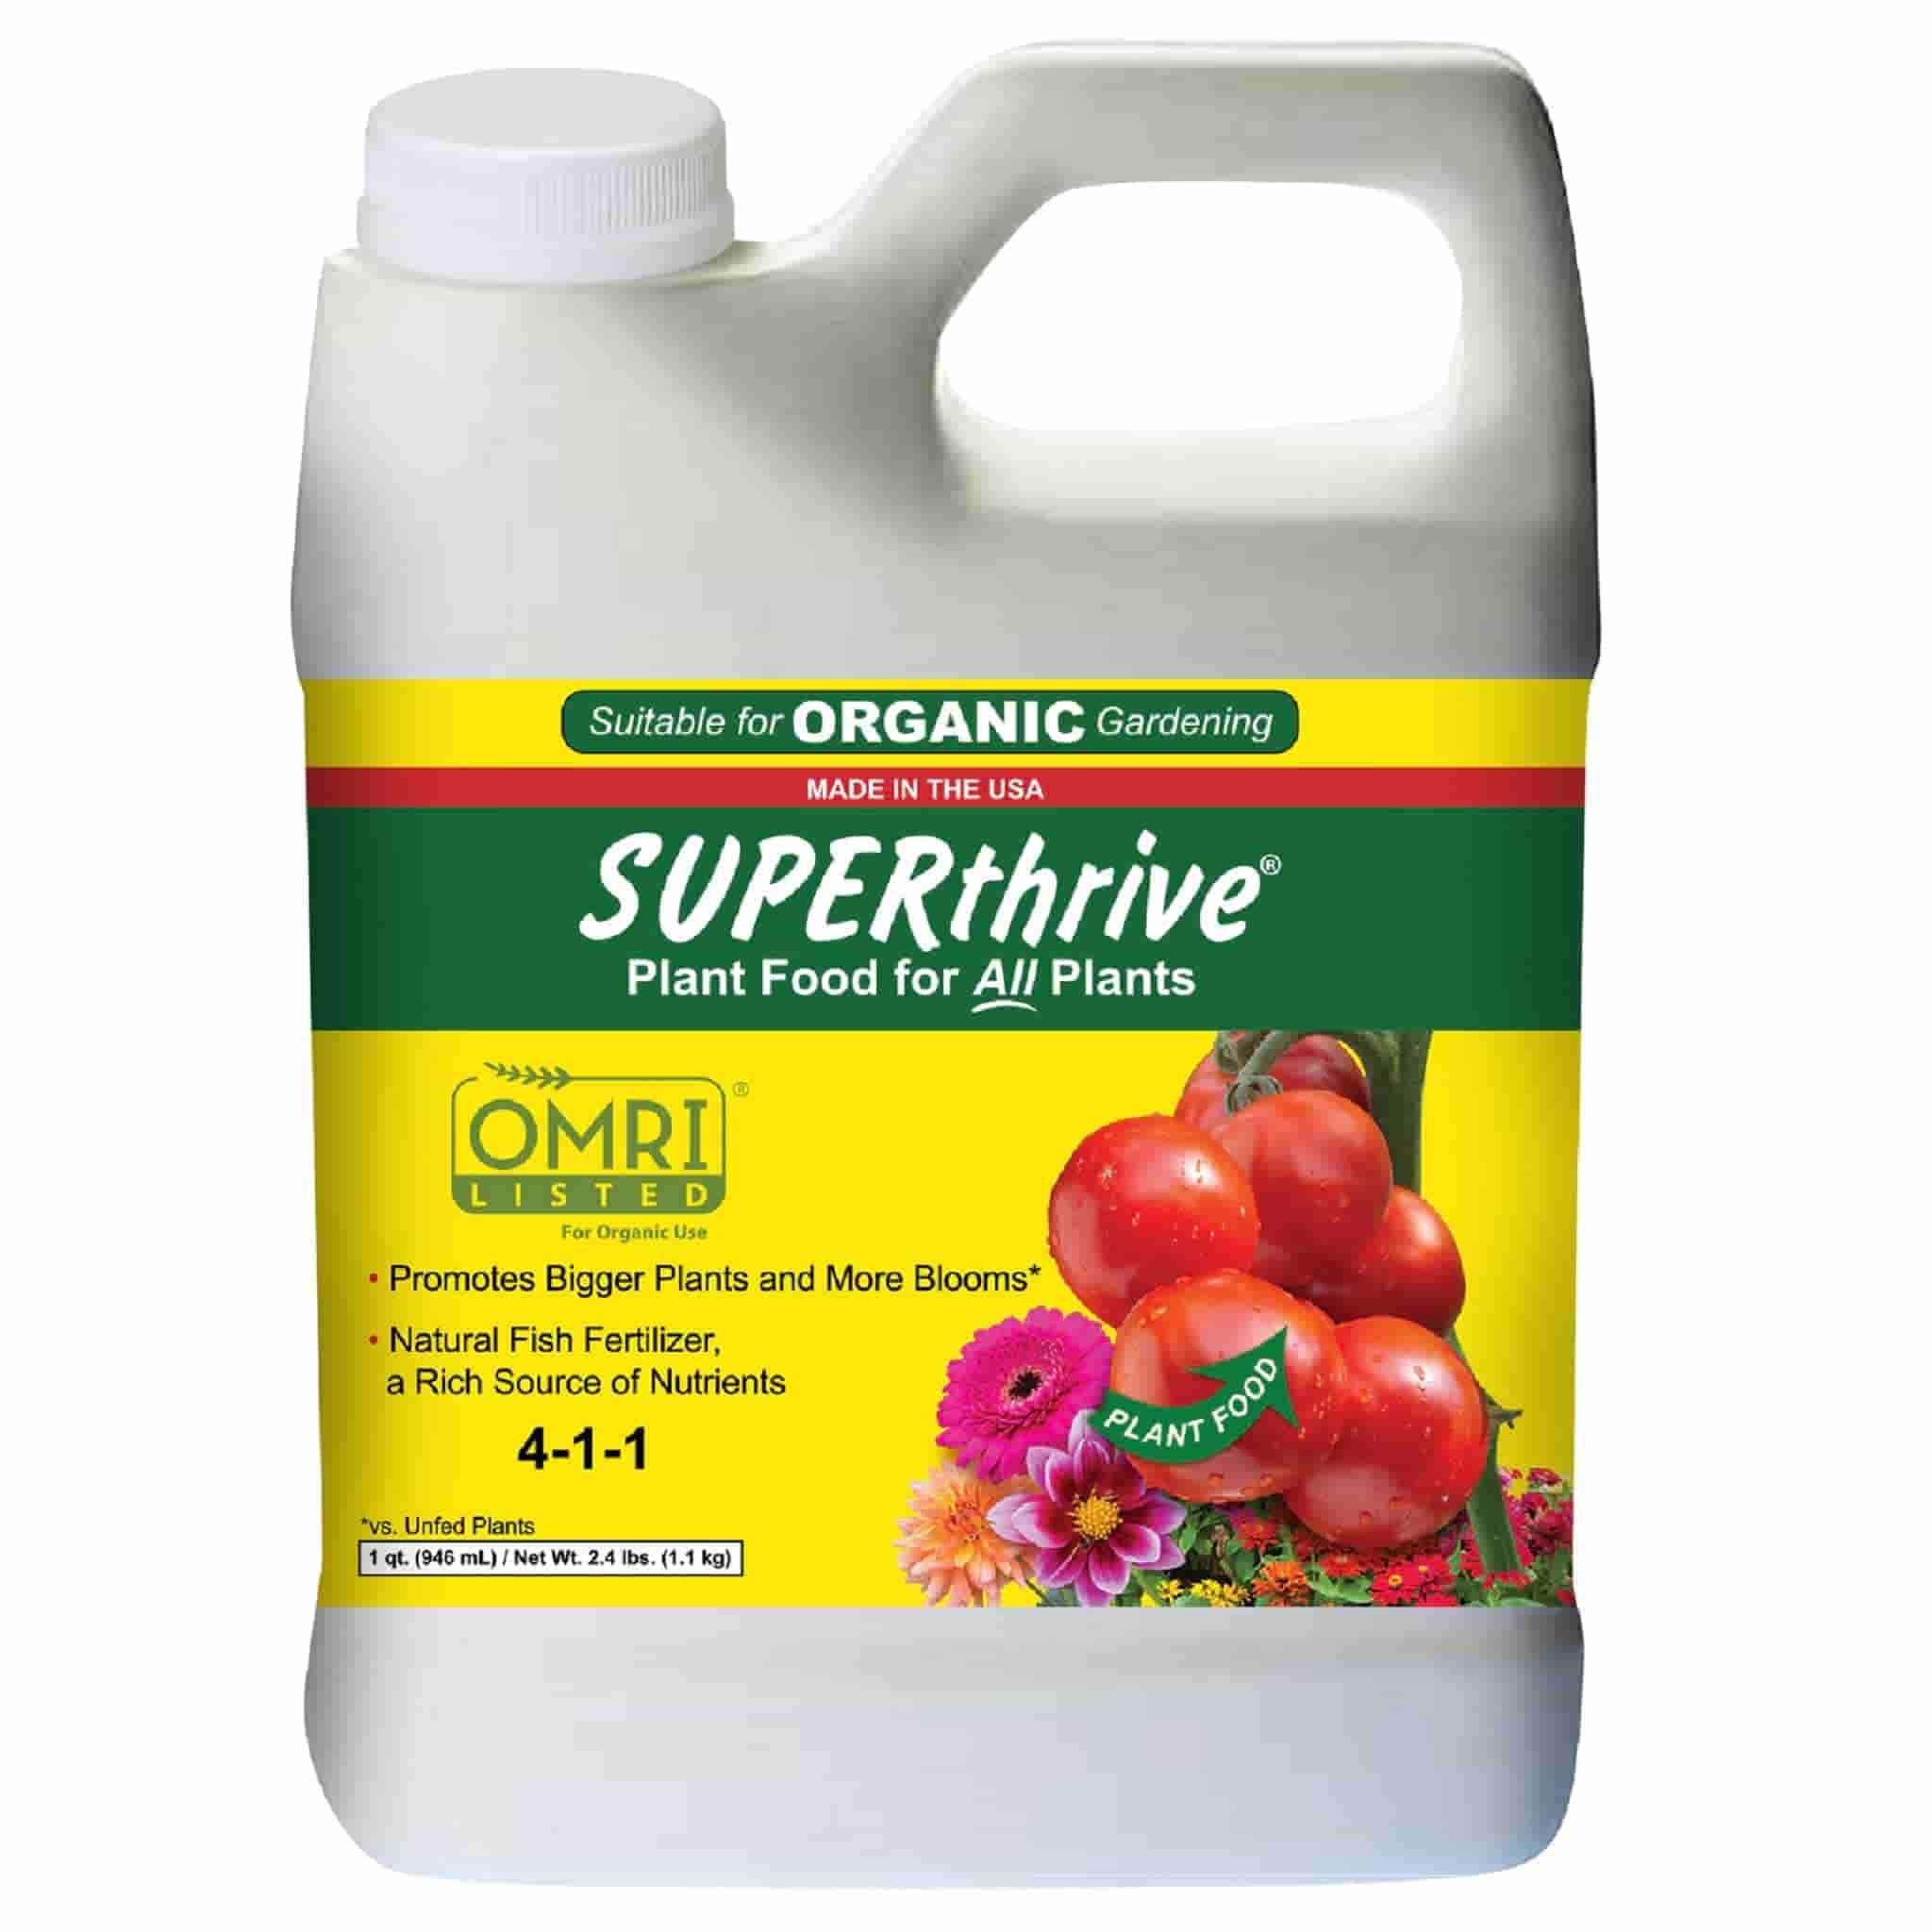 SUPERthrive Organic Plant Food with Fish Emulsion – Ferry-Morse